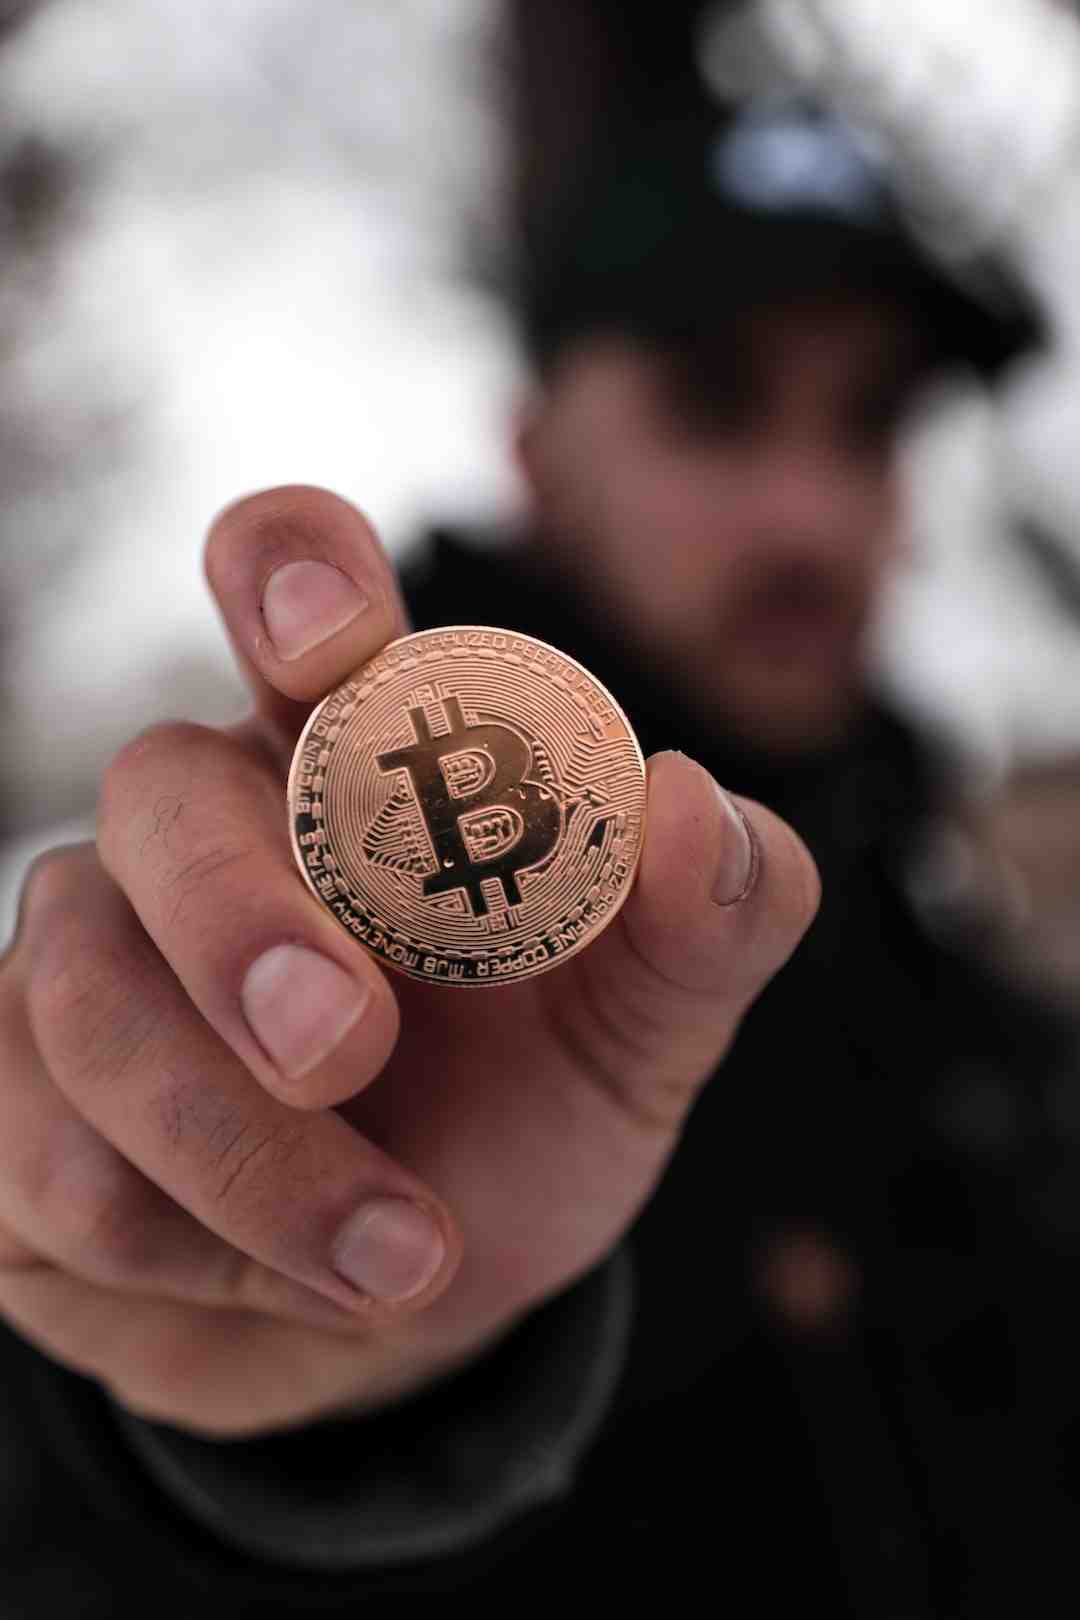 How much Bitcoin should a beginner buy?